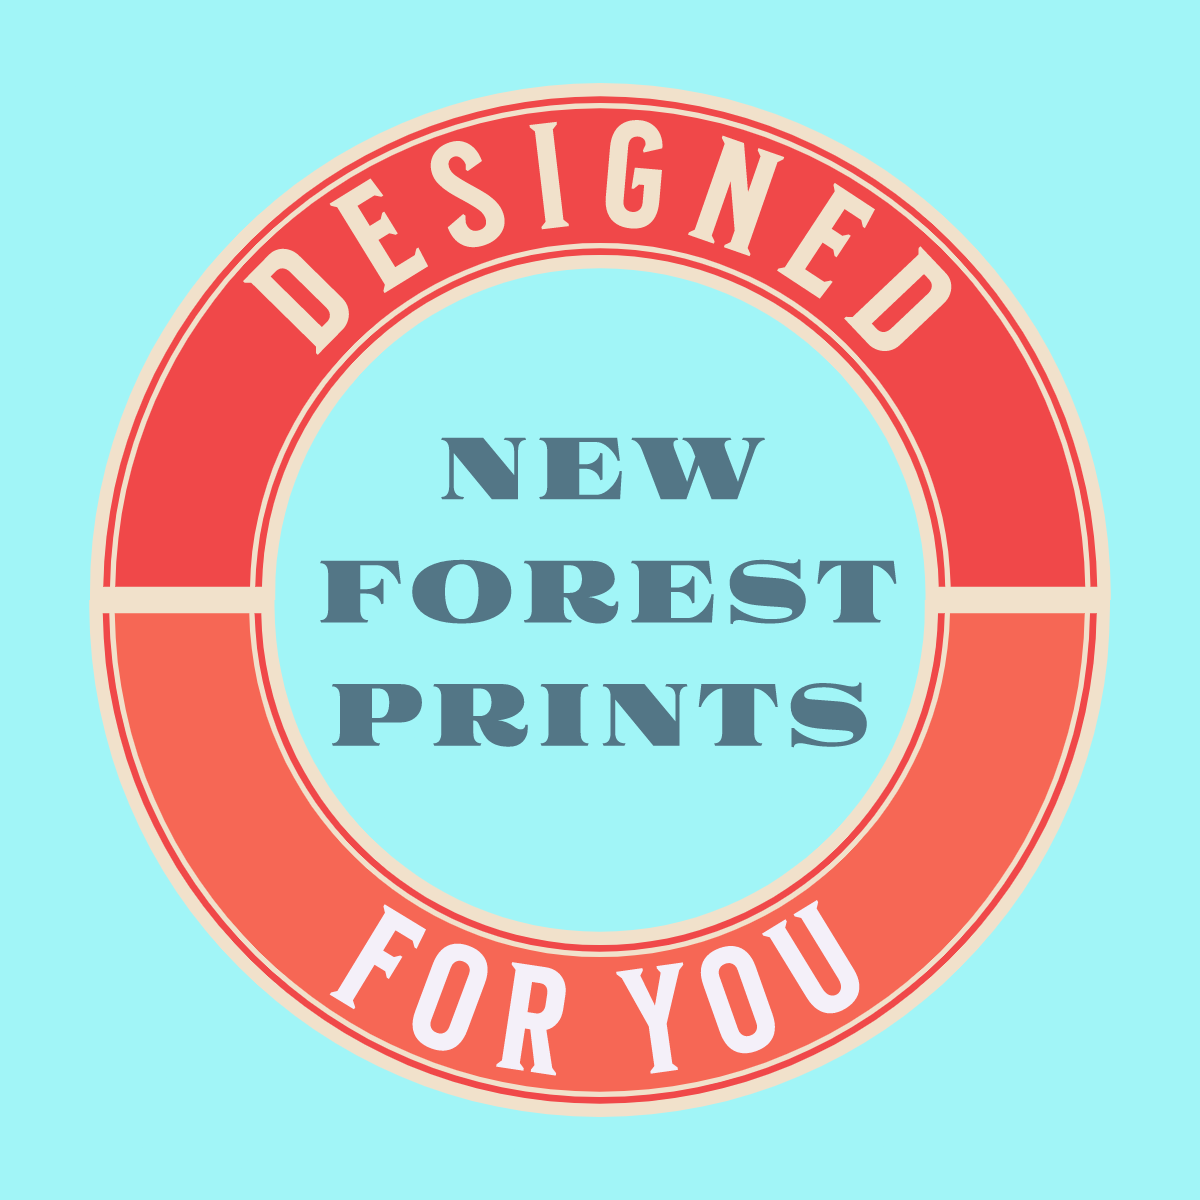 New Forest Prints - Designed for you